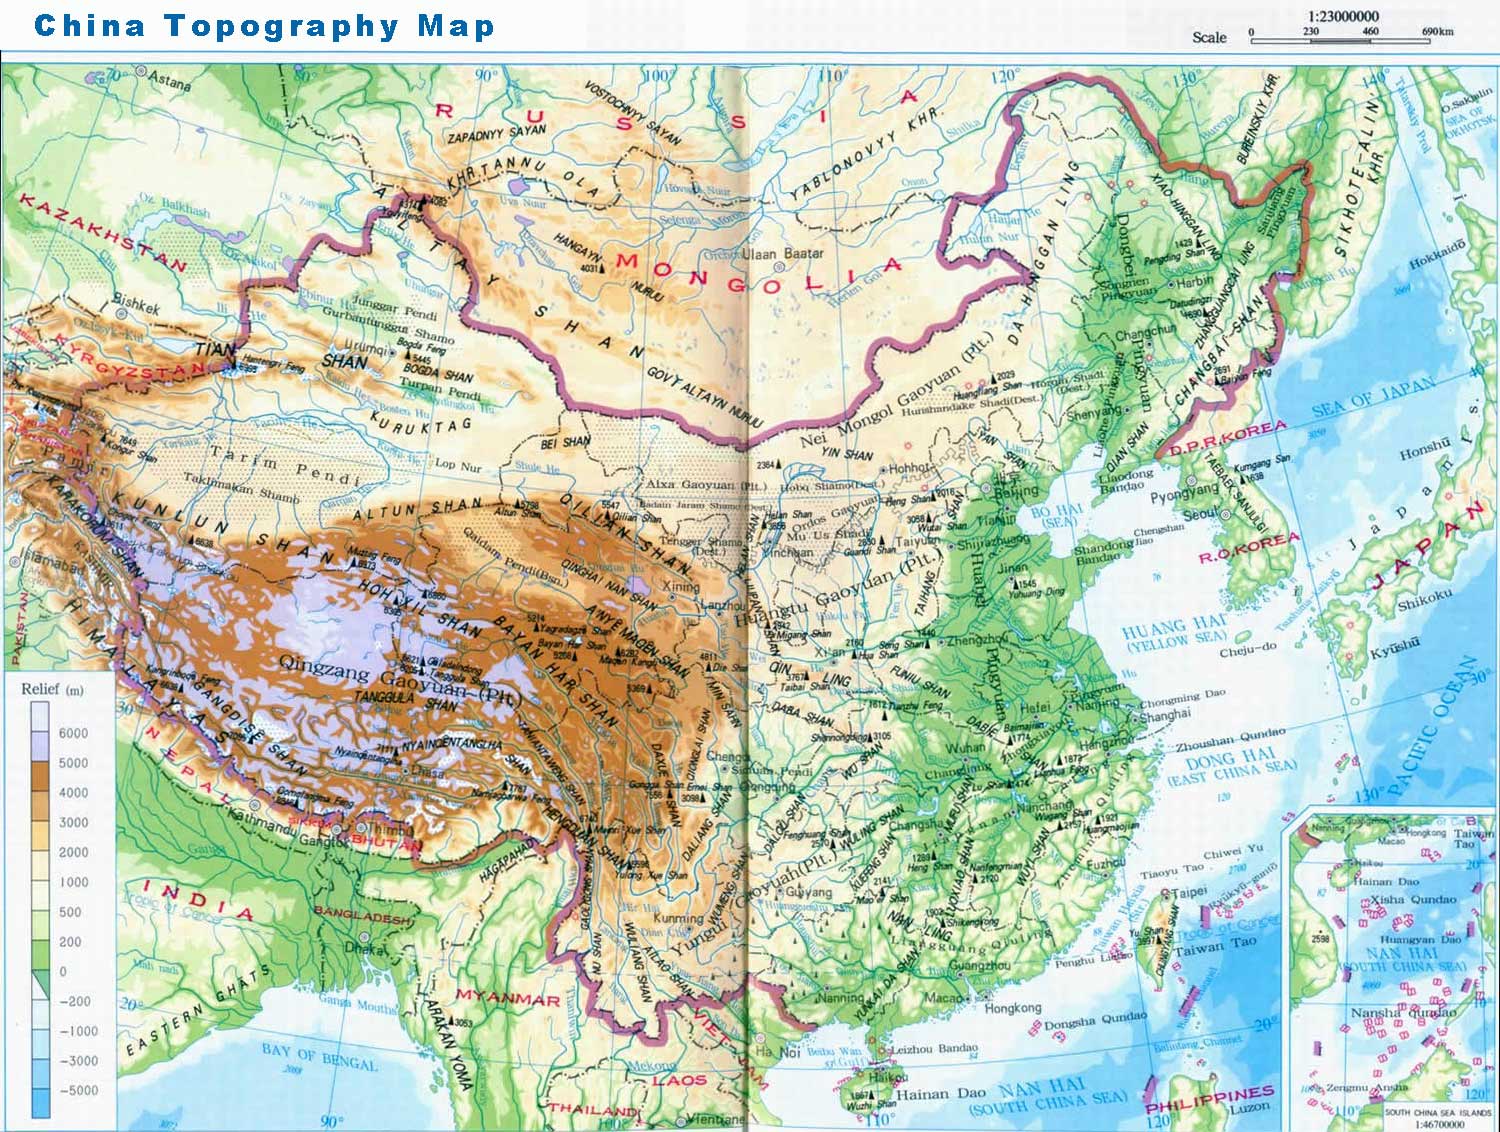 China Topography Map